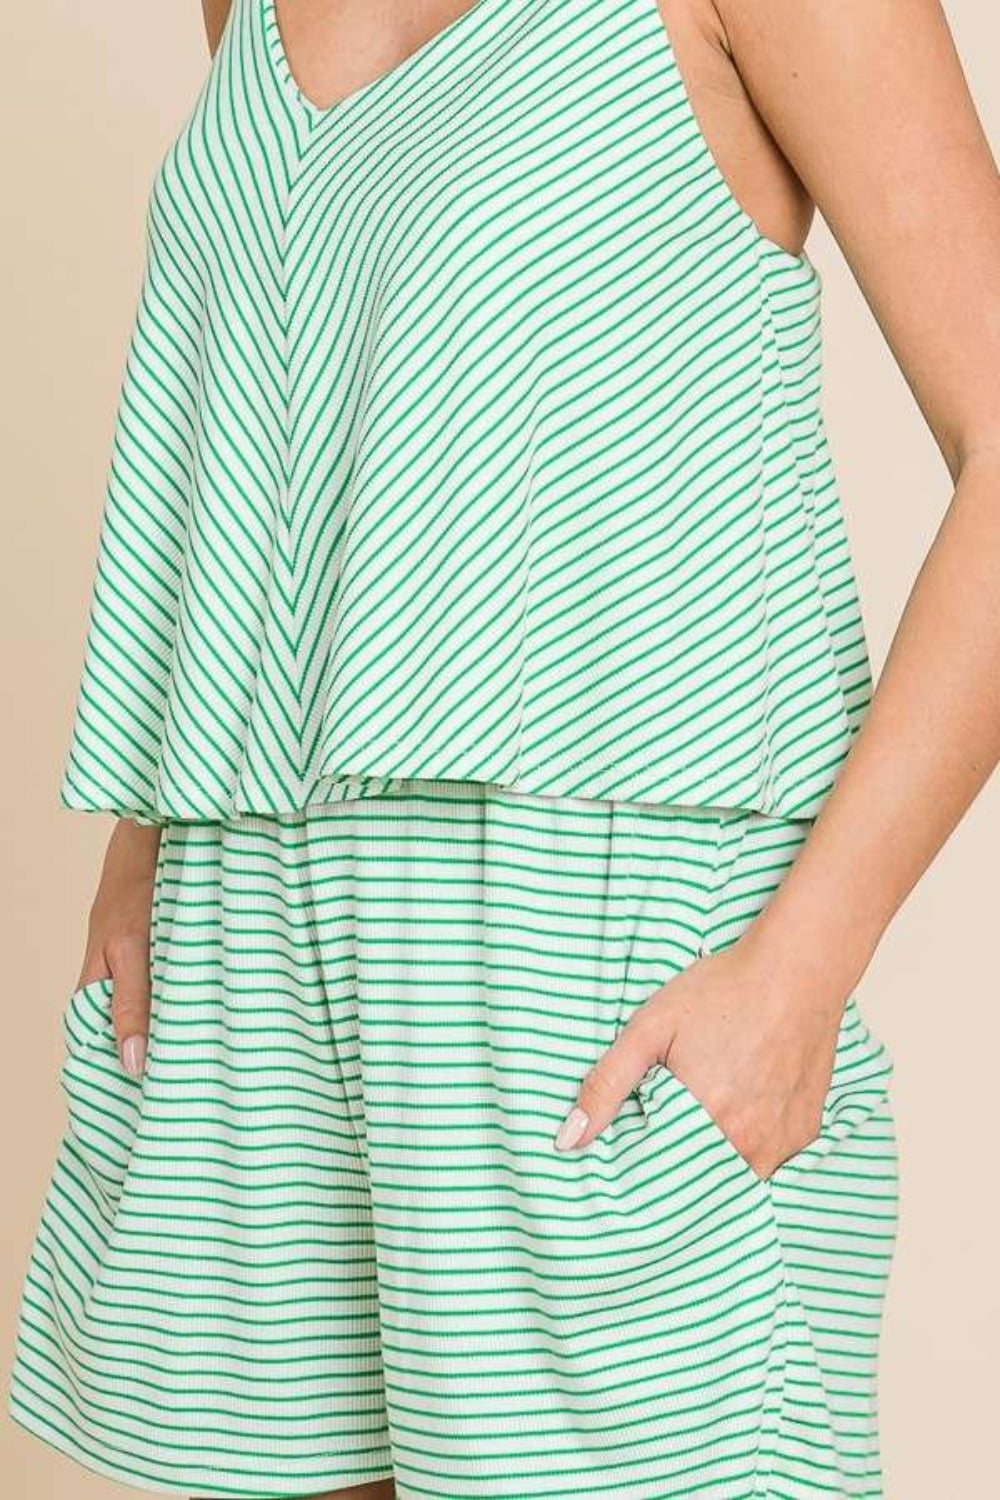 Culture Code Full Size Double Flare Striped Romper - Three Bears Boutique